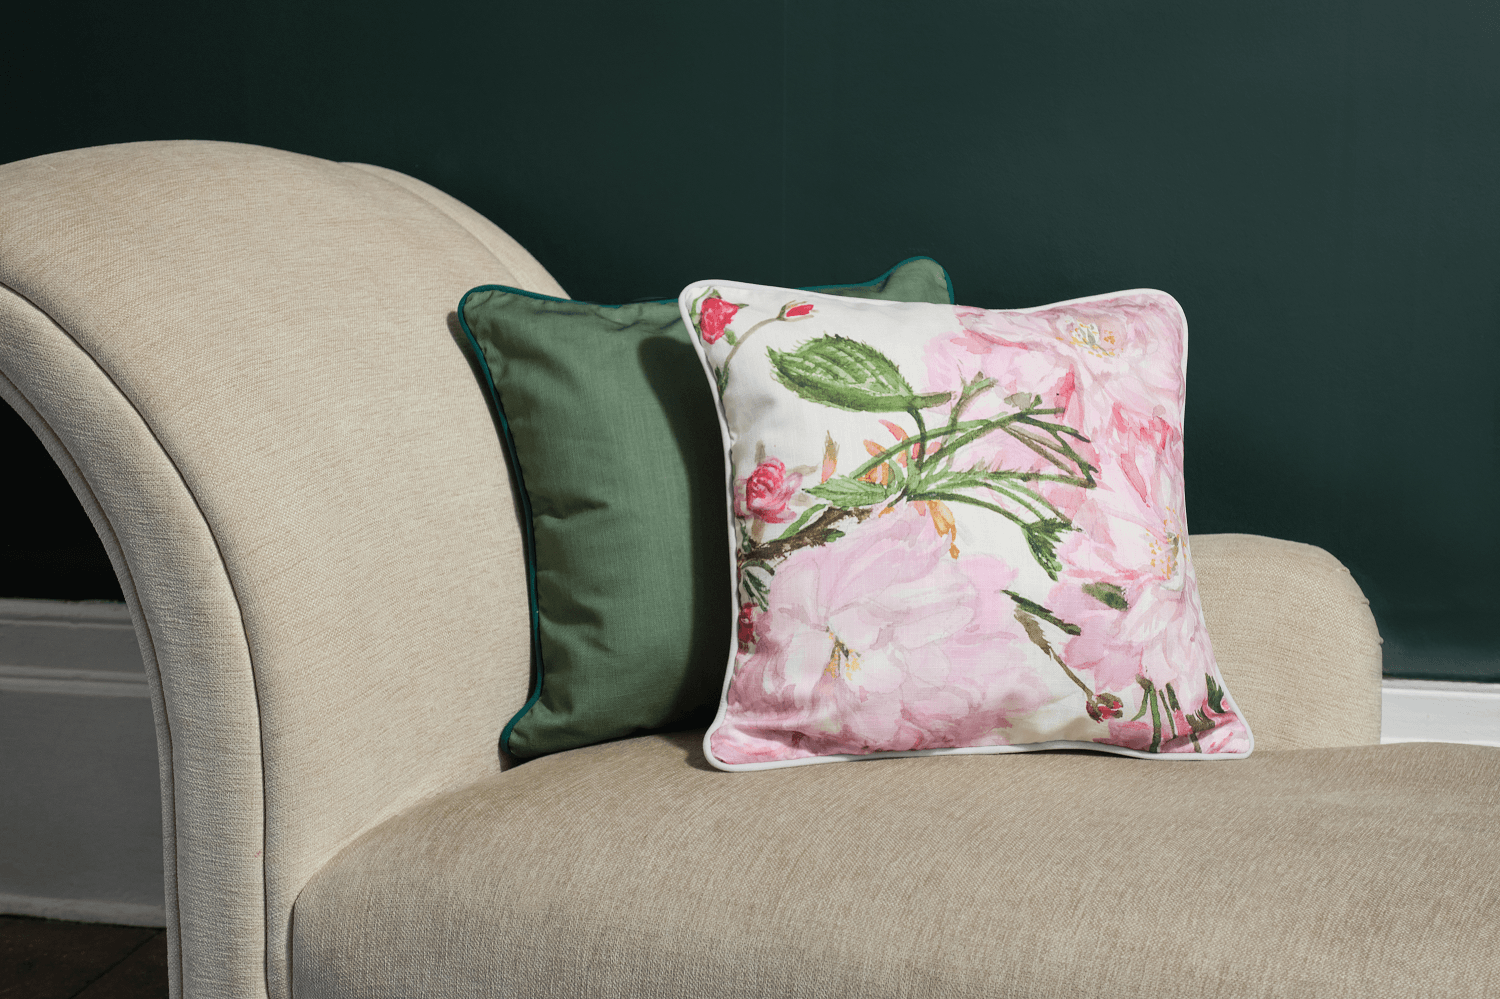 Pink Perfection - Alfred Wise Cushion